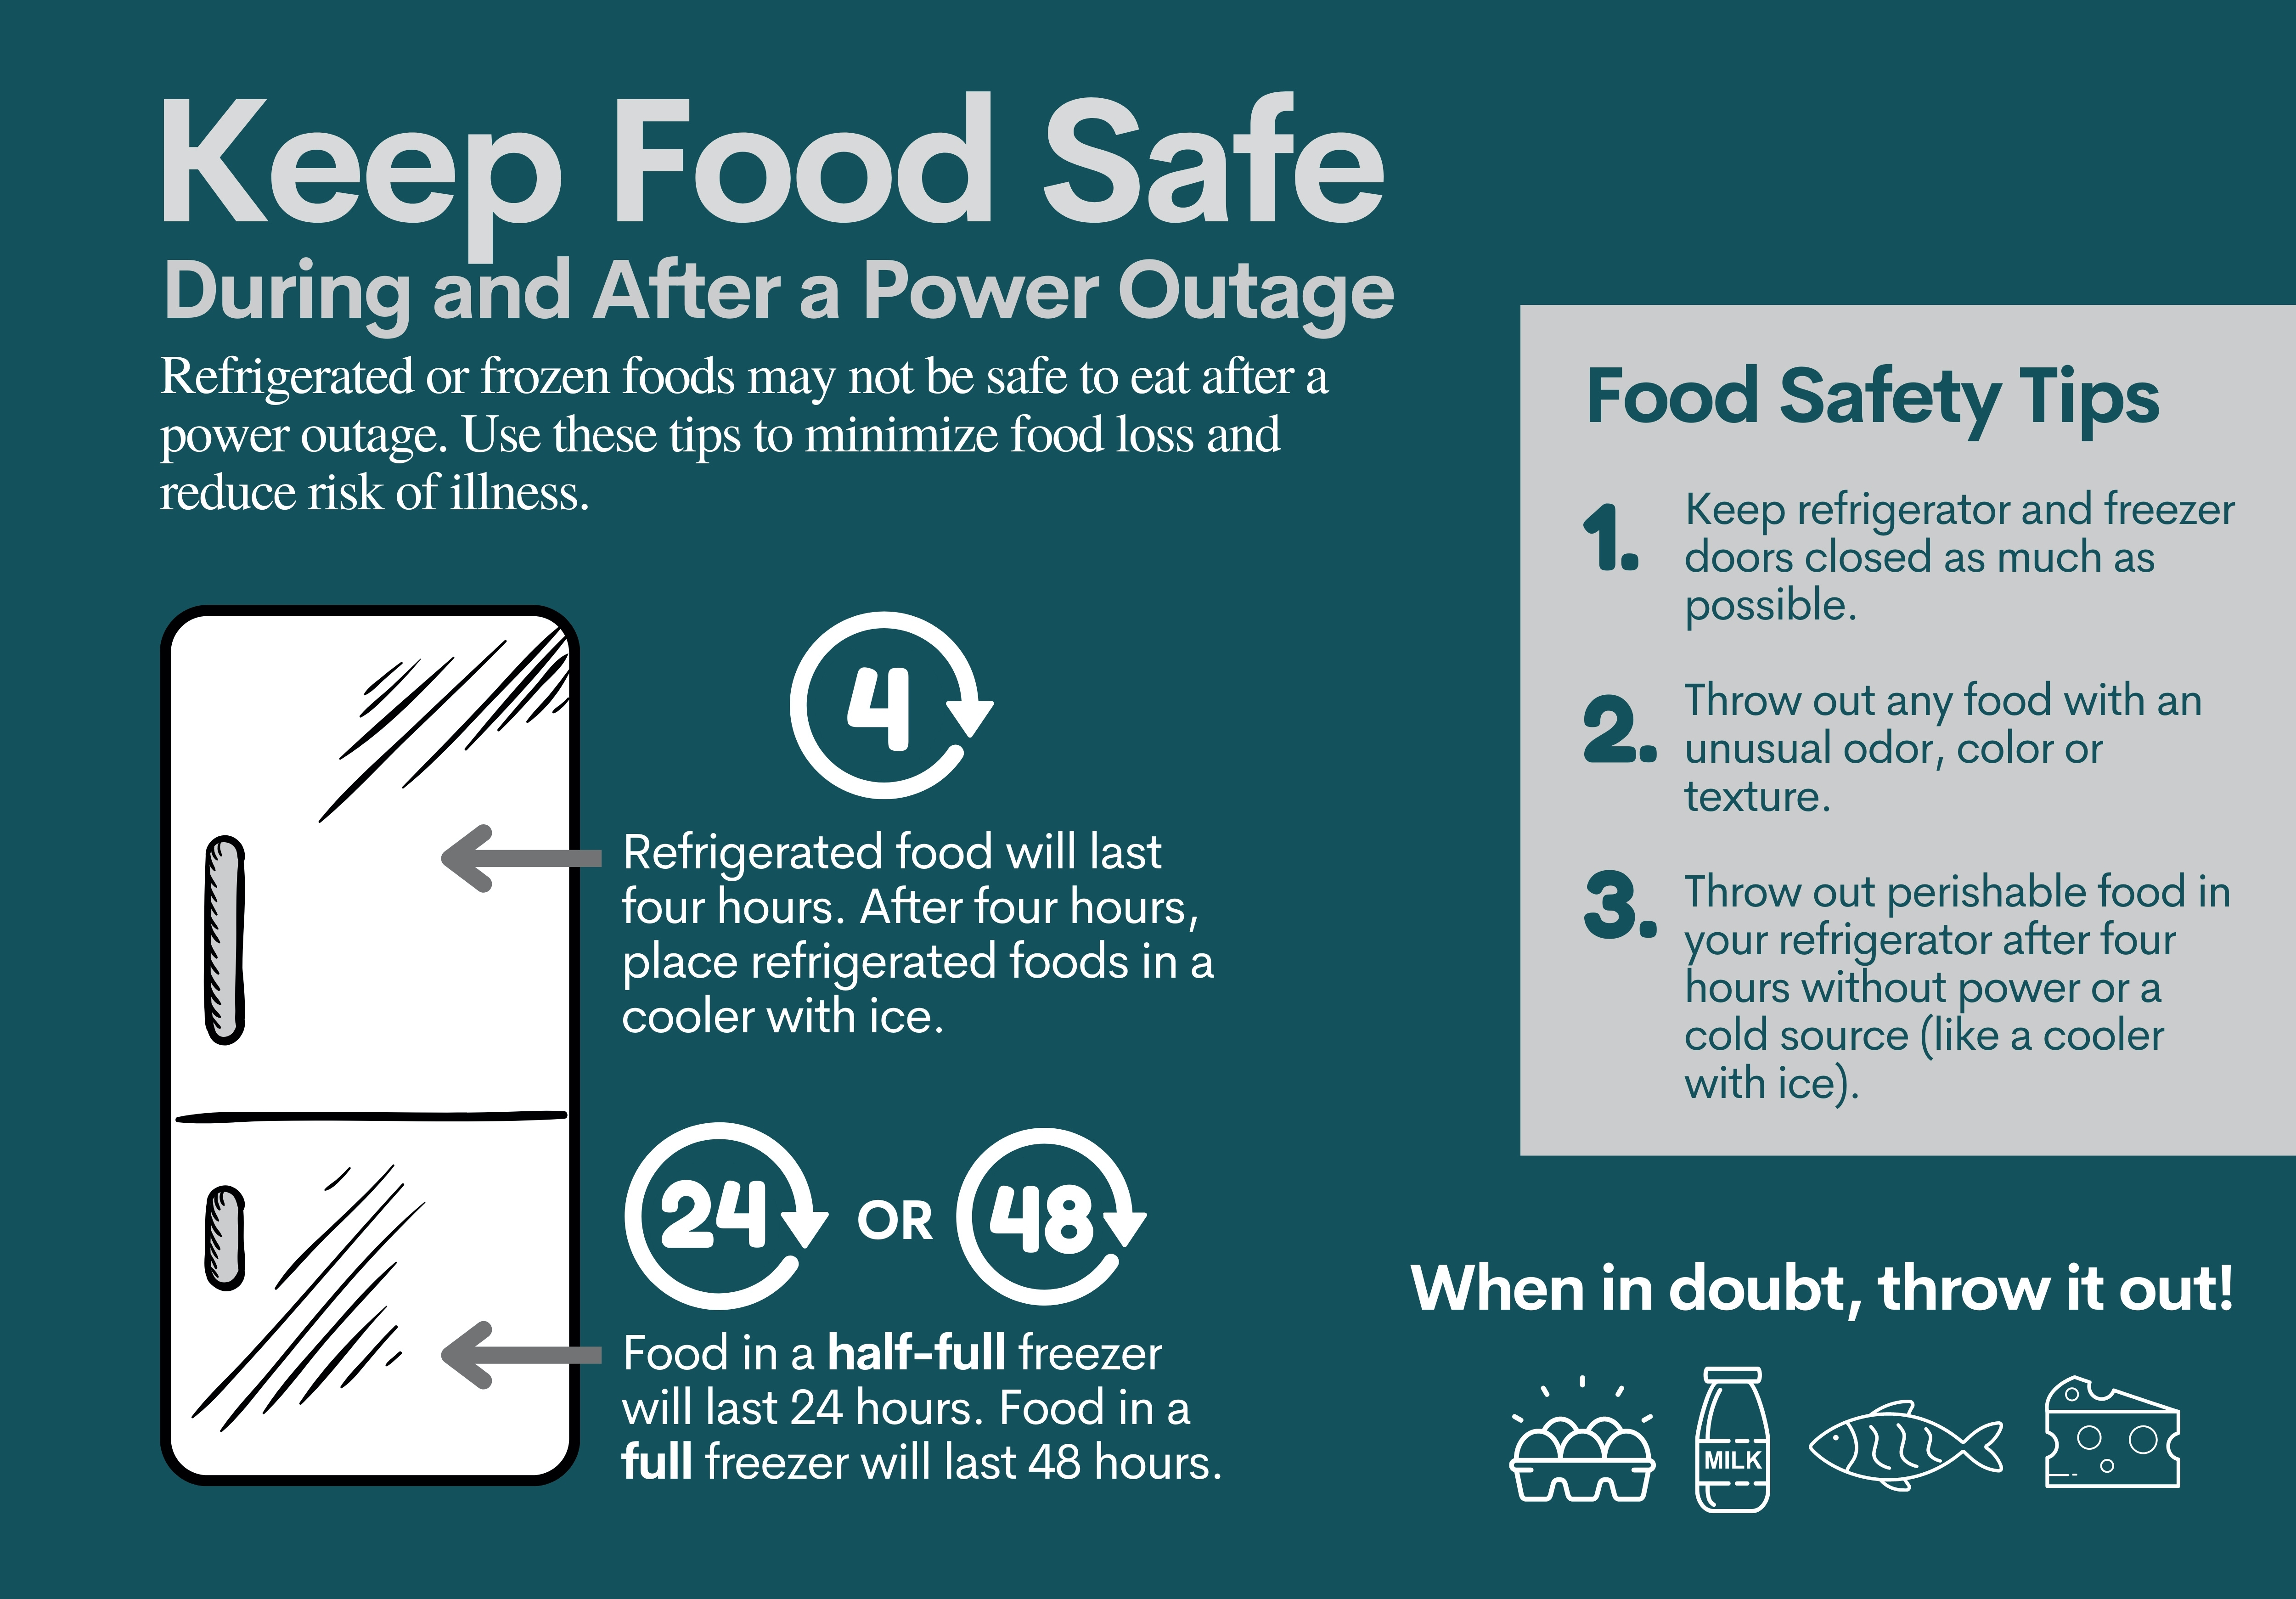 Blue infographic showing refrigerator. Text reads: "Keep Food Safe During and After a Power Outage. Refrigerated or frozen foods may not be safe to eat after a power outage. Use these tips to minimize food loss and reduce risk of illness. Refrigerated food will last four hours. After four hours, place refrigerated foods in a cooler with ice. Food in a half-full frezzer will last 24 hours. Food in a full freezer will last 48 hours. Food Safety Tips: 1.) Keep refrigerator and freezer doors closed as much as possible. 2.) Throw out any food with an unusual odor, color, or texture. 3.) Throw out perishable food in your refrigerator after four hours without power or a cold source (like a cooler with ice). When in doubt, throw it out!